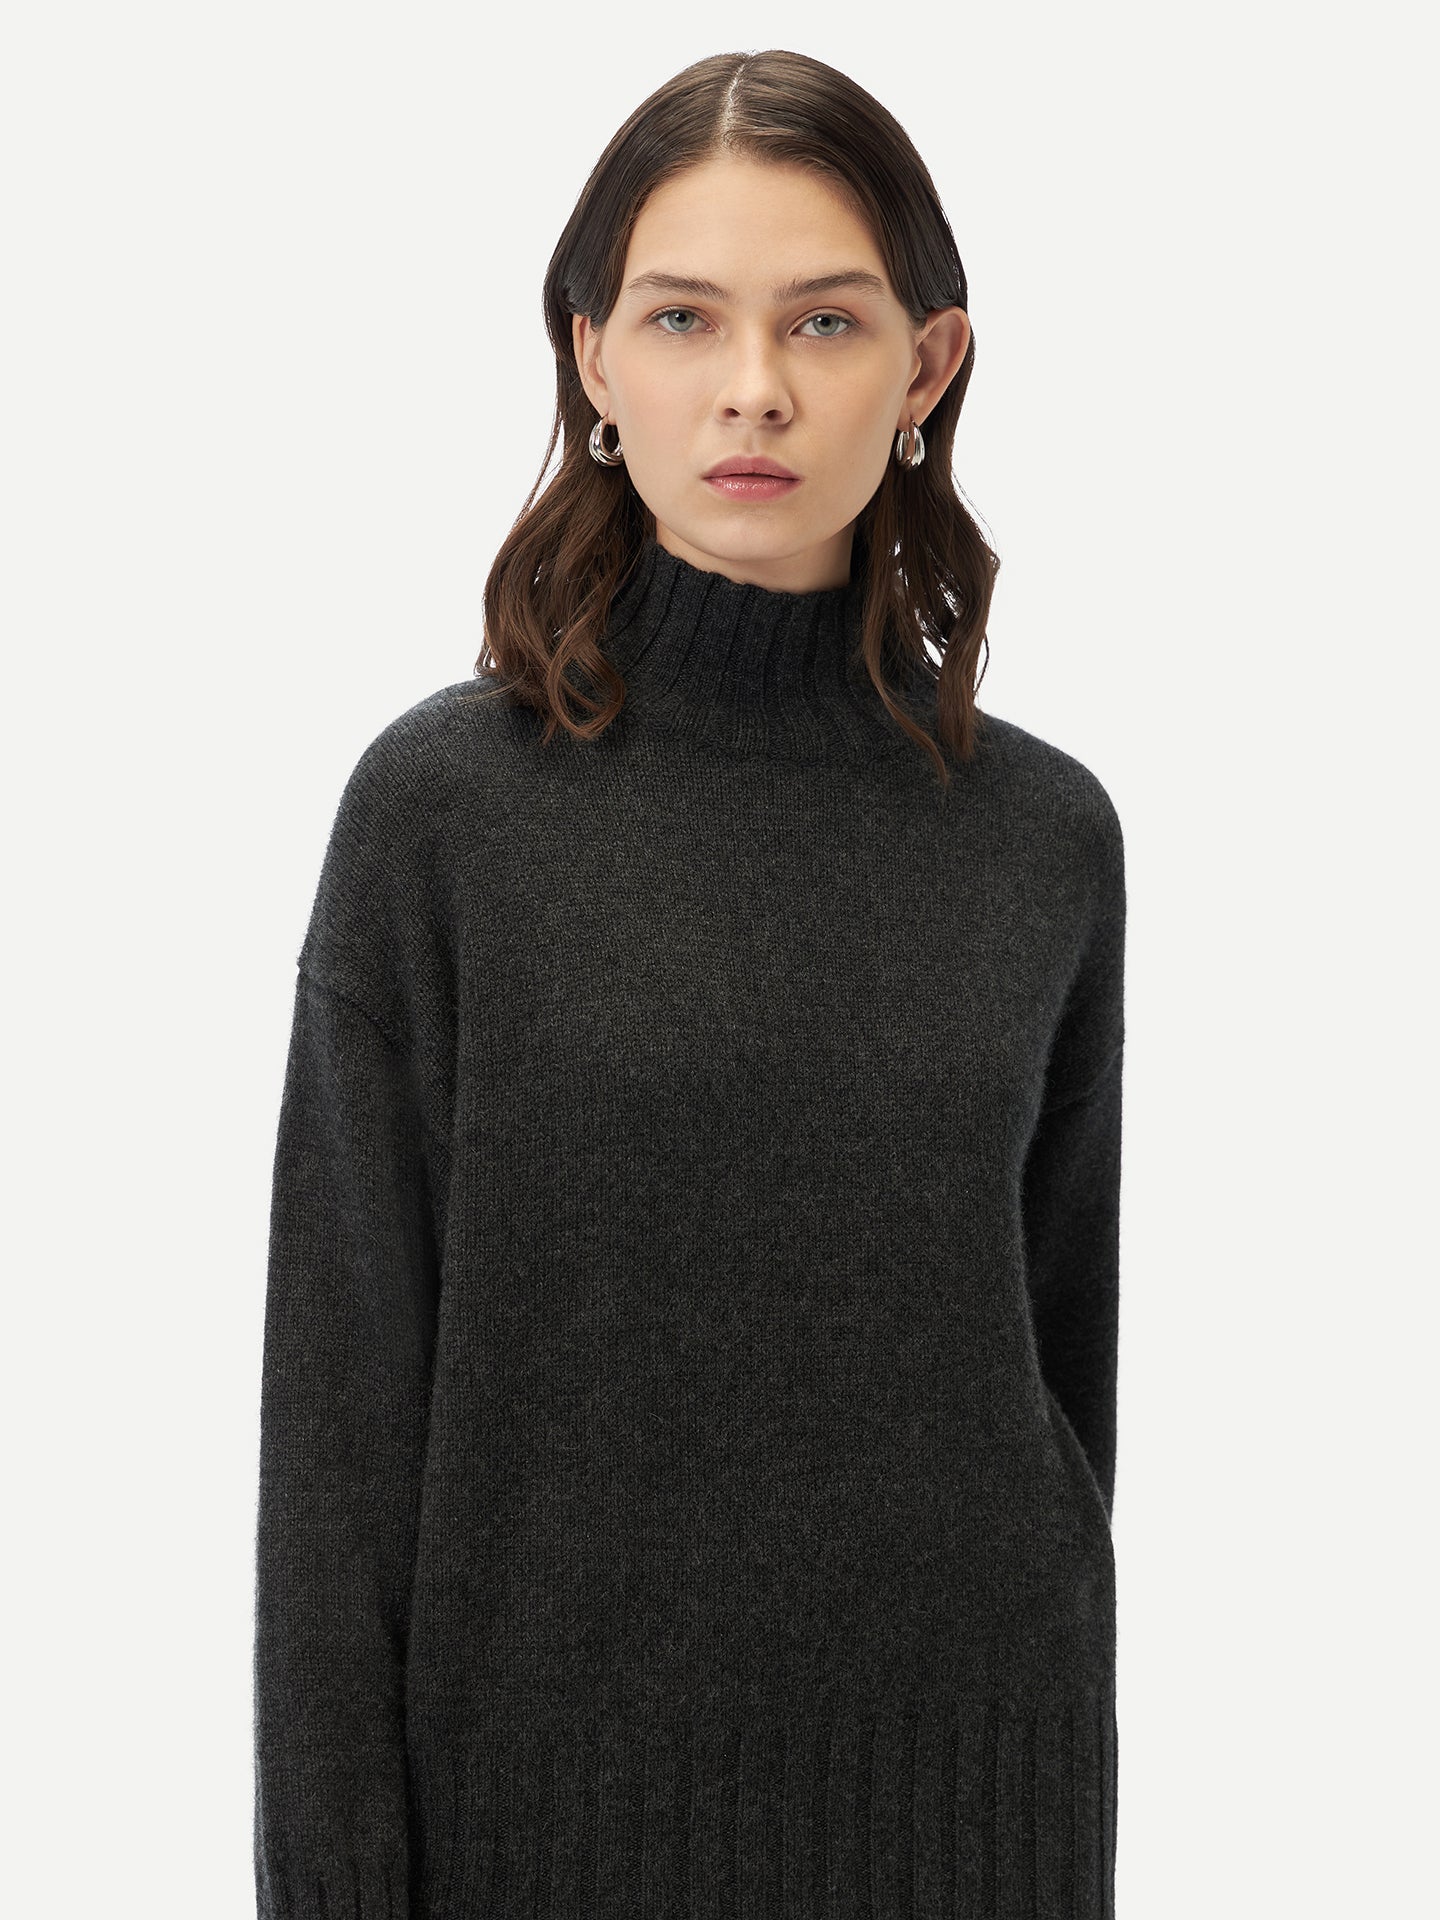 Women's Relaxed-Fit Cashmere Turtleneck Charcoal - Gobi Cashmere